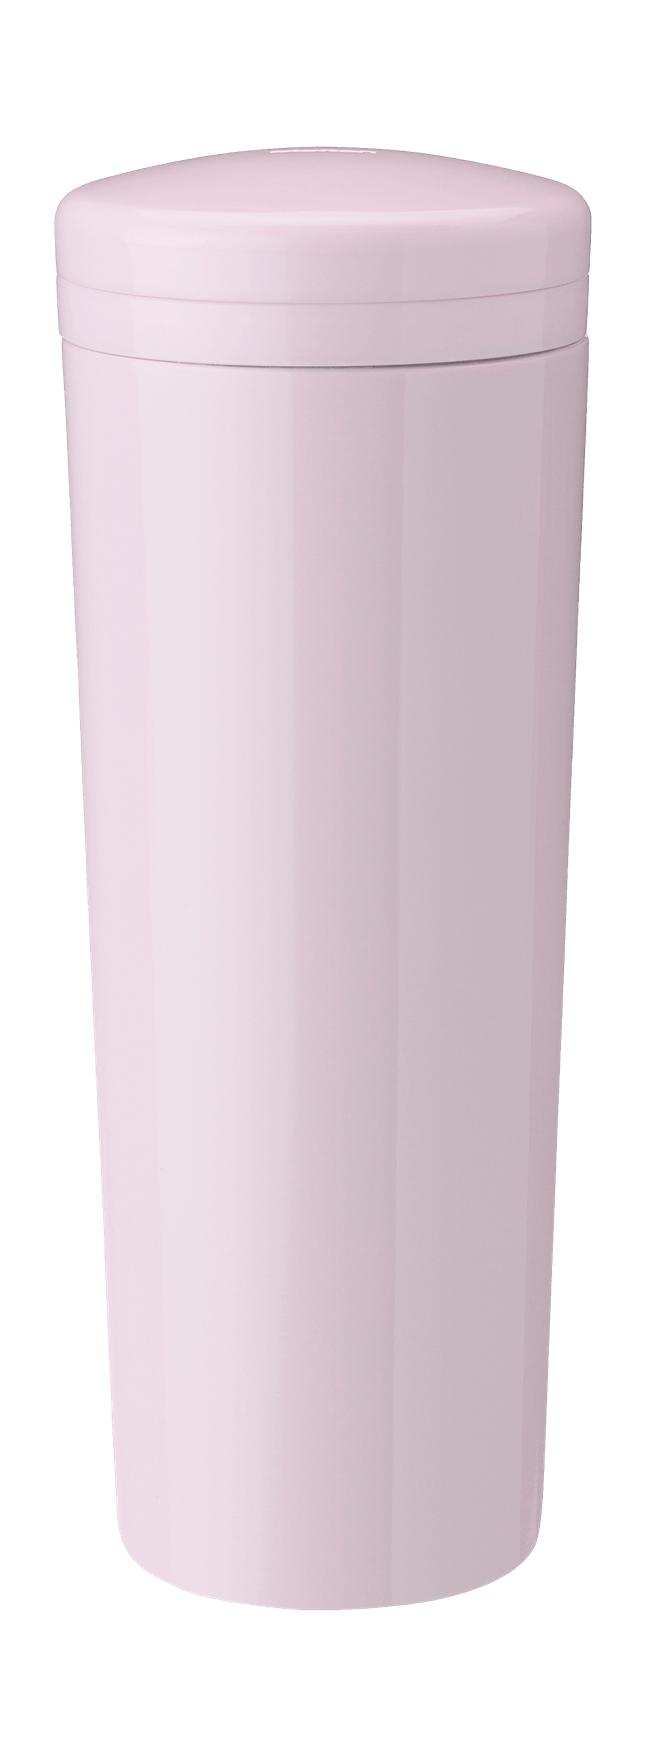 Stelton Carrie Thermos Bottle 0,5 L, Rose